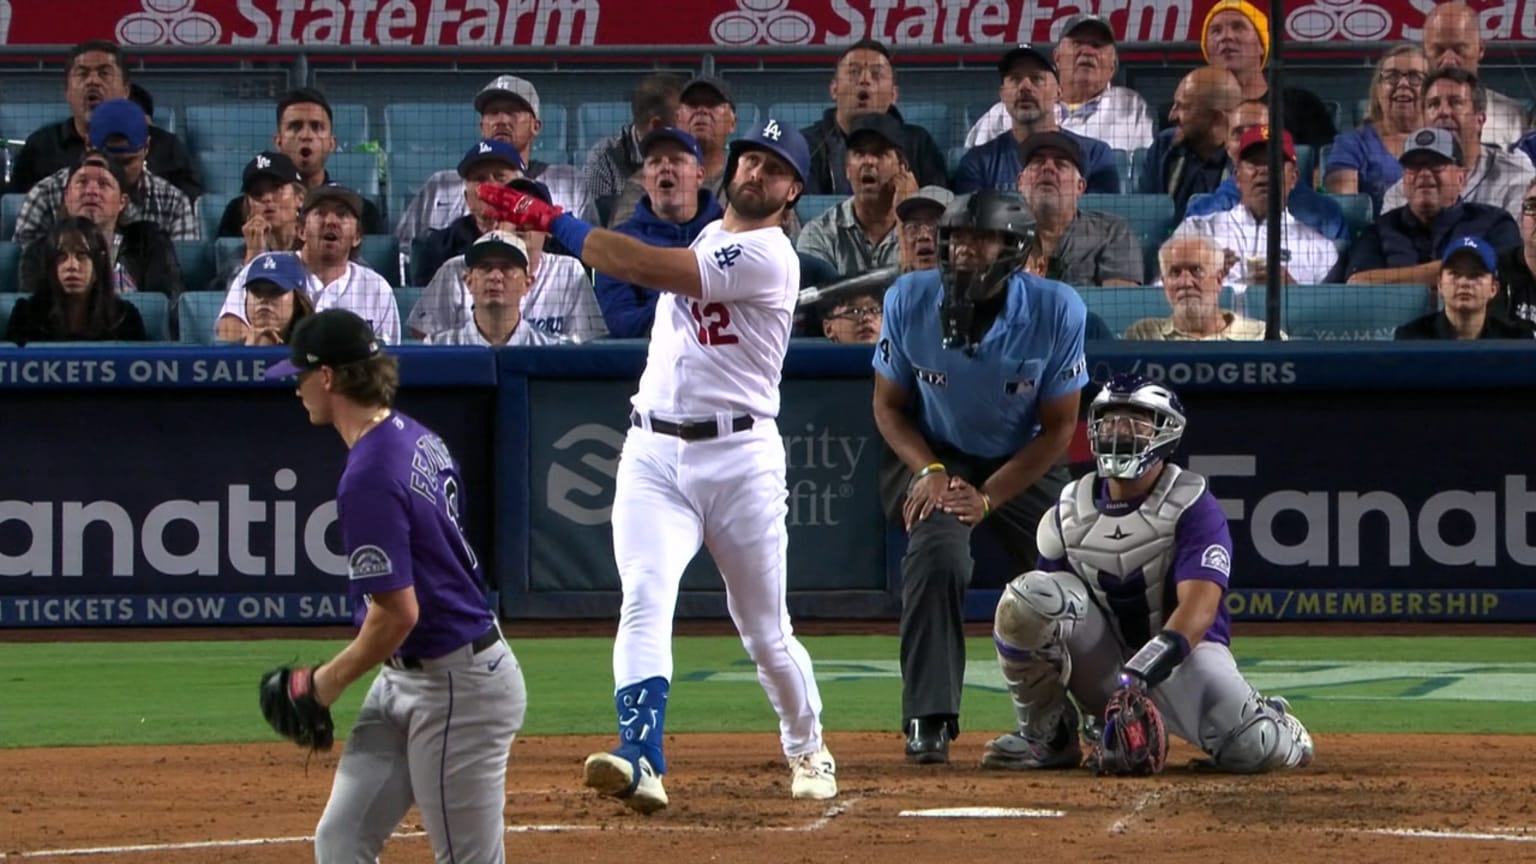 Joey Gallo Scraped Heaven With a Ridiculously High Homer